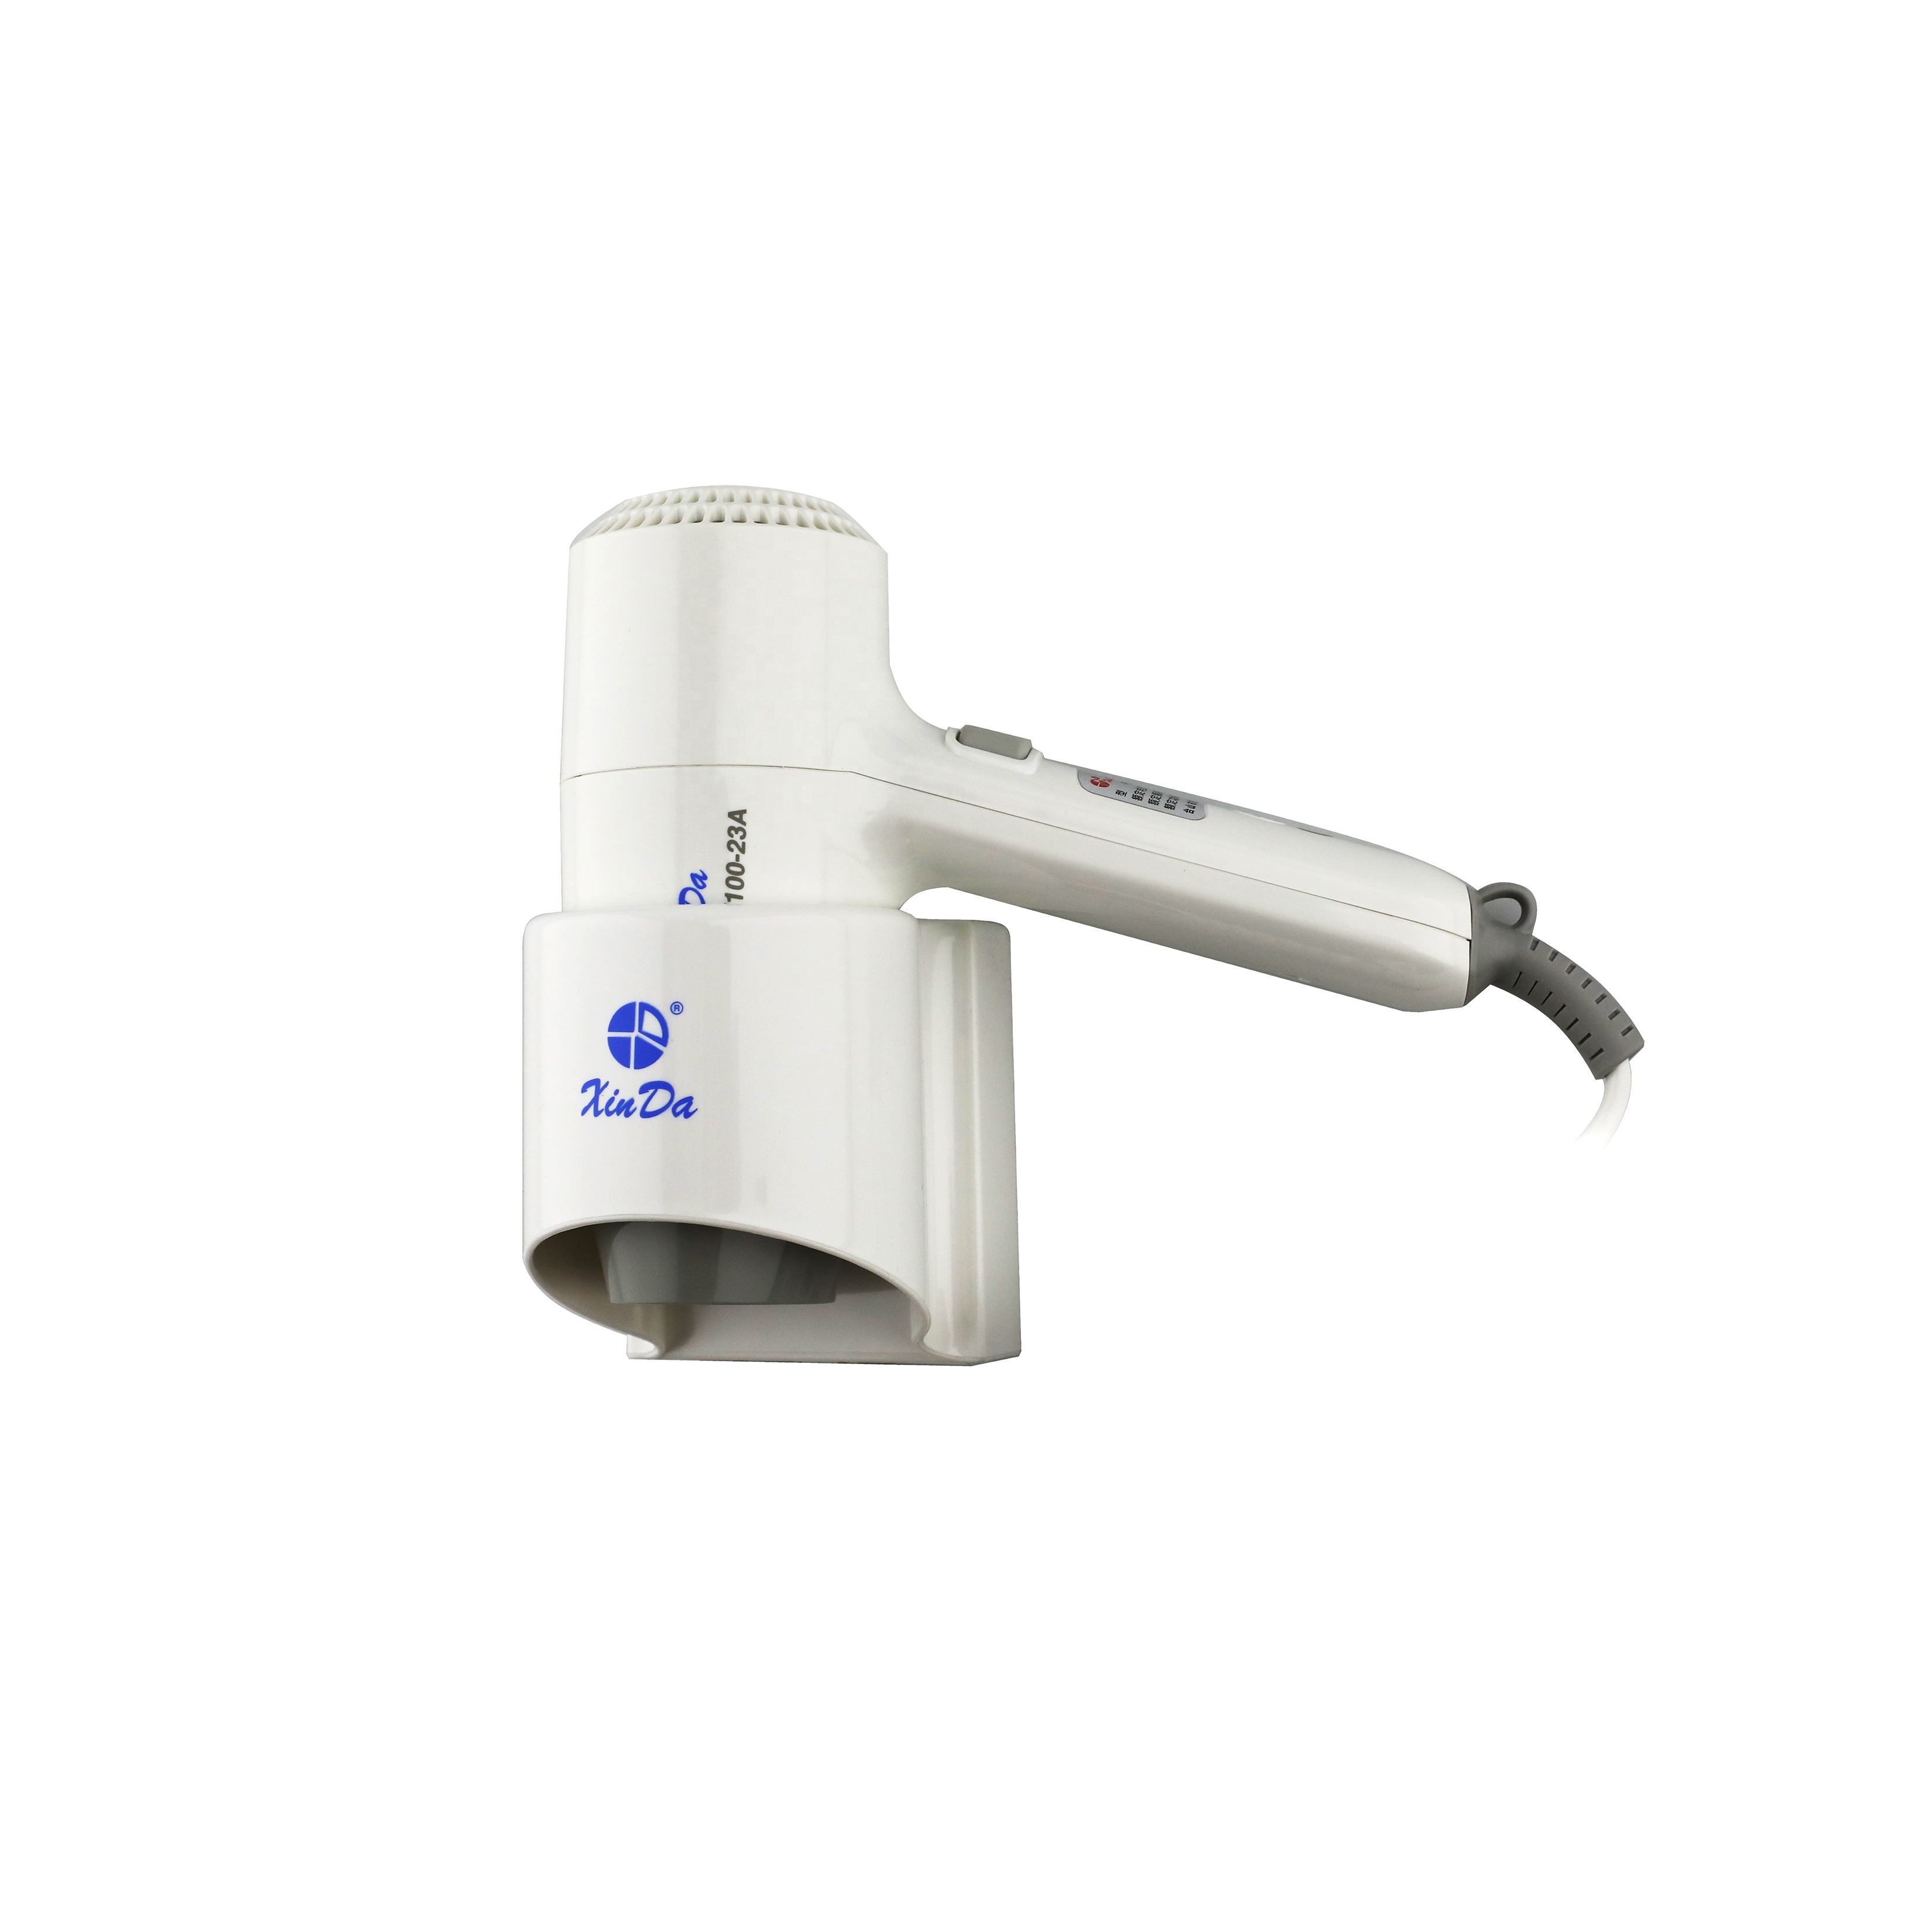 The XINDA RCY-100 23A for Home & Hotel Convenience Mounted Base with Safety Switch ABS White Hair Dryer